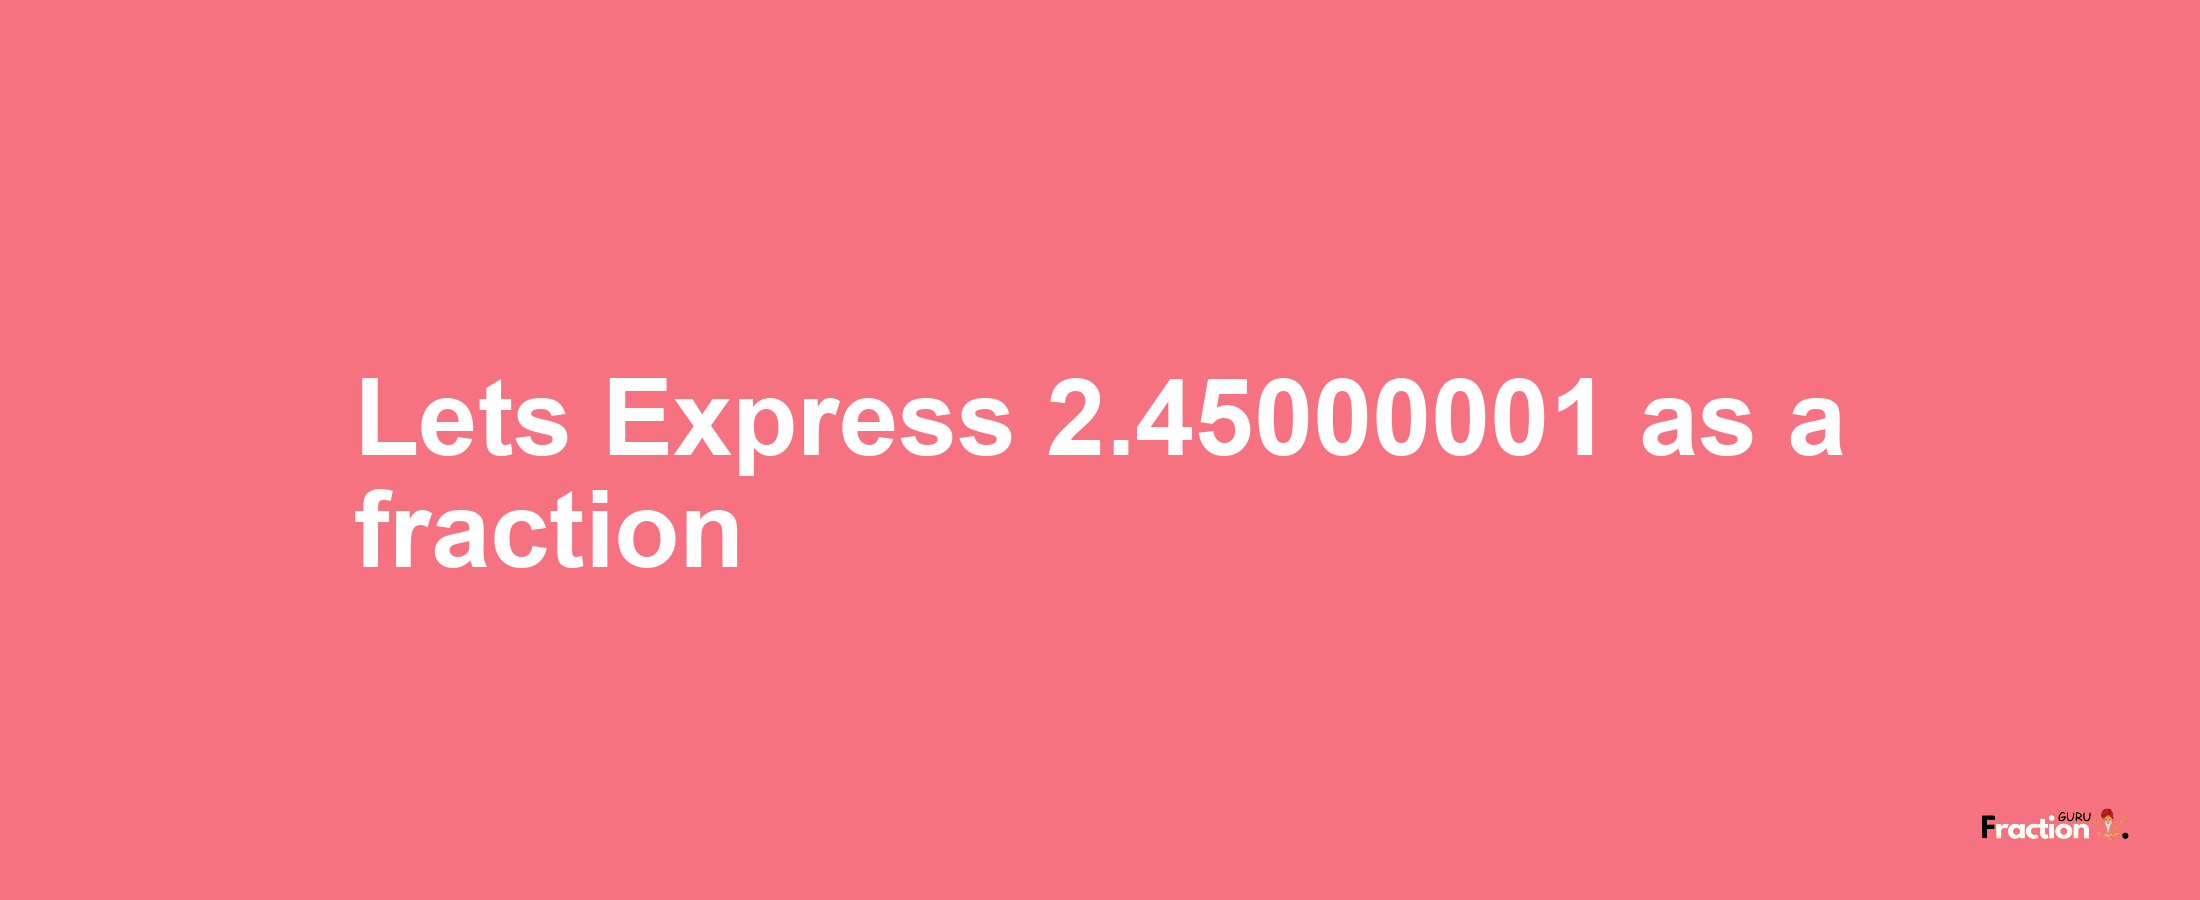 Lets Express 2.45000001 as afraction